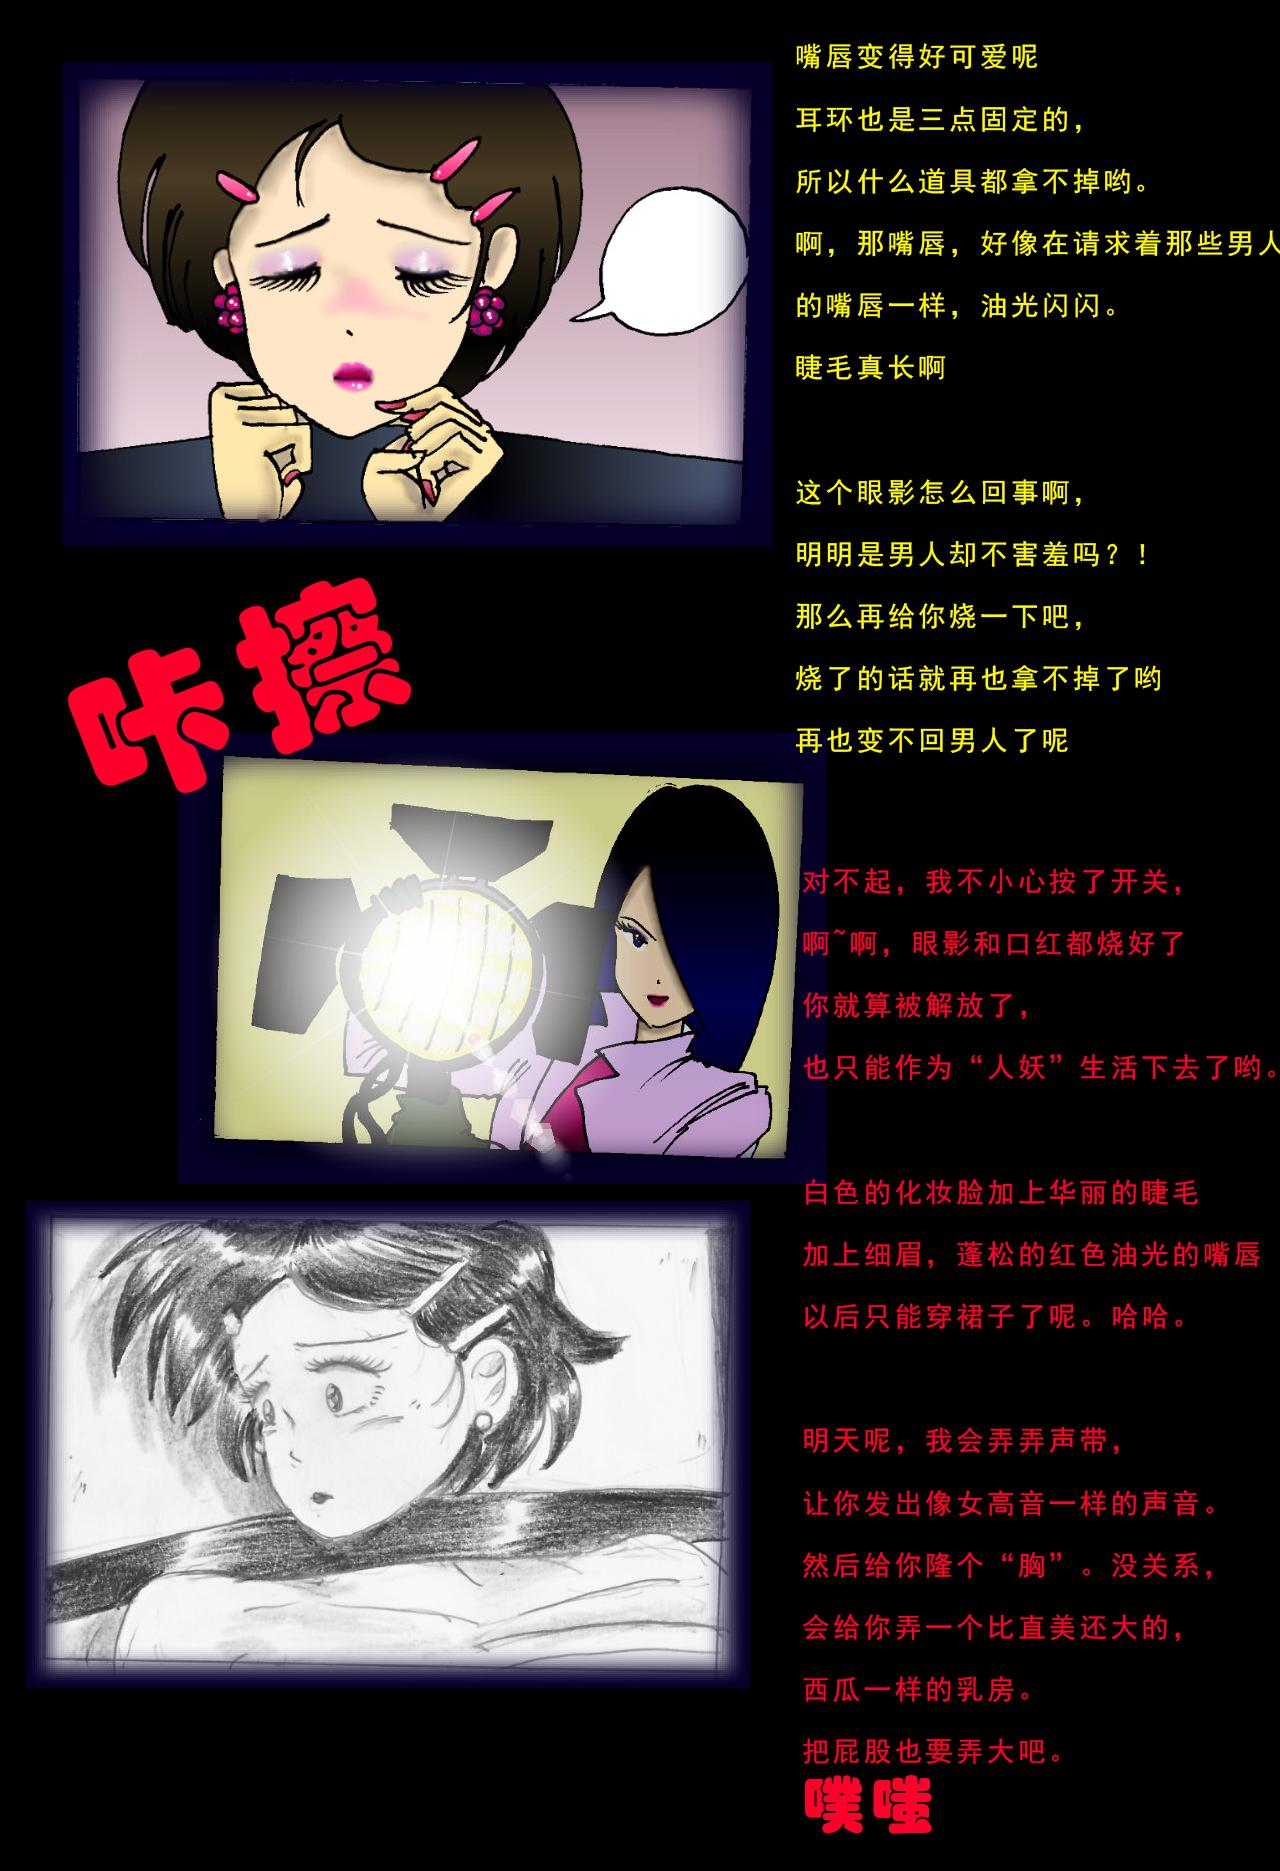 Nipples Special Police Third Platoon Captain Abduction Restraint Edition【chinese】 Deep Throat - Page 8